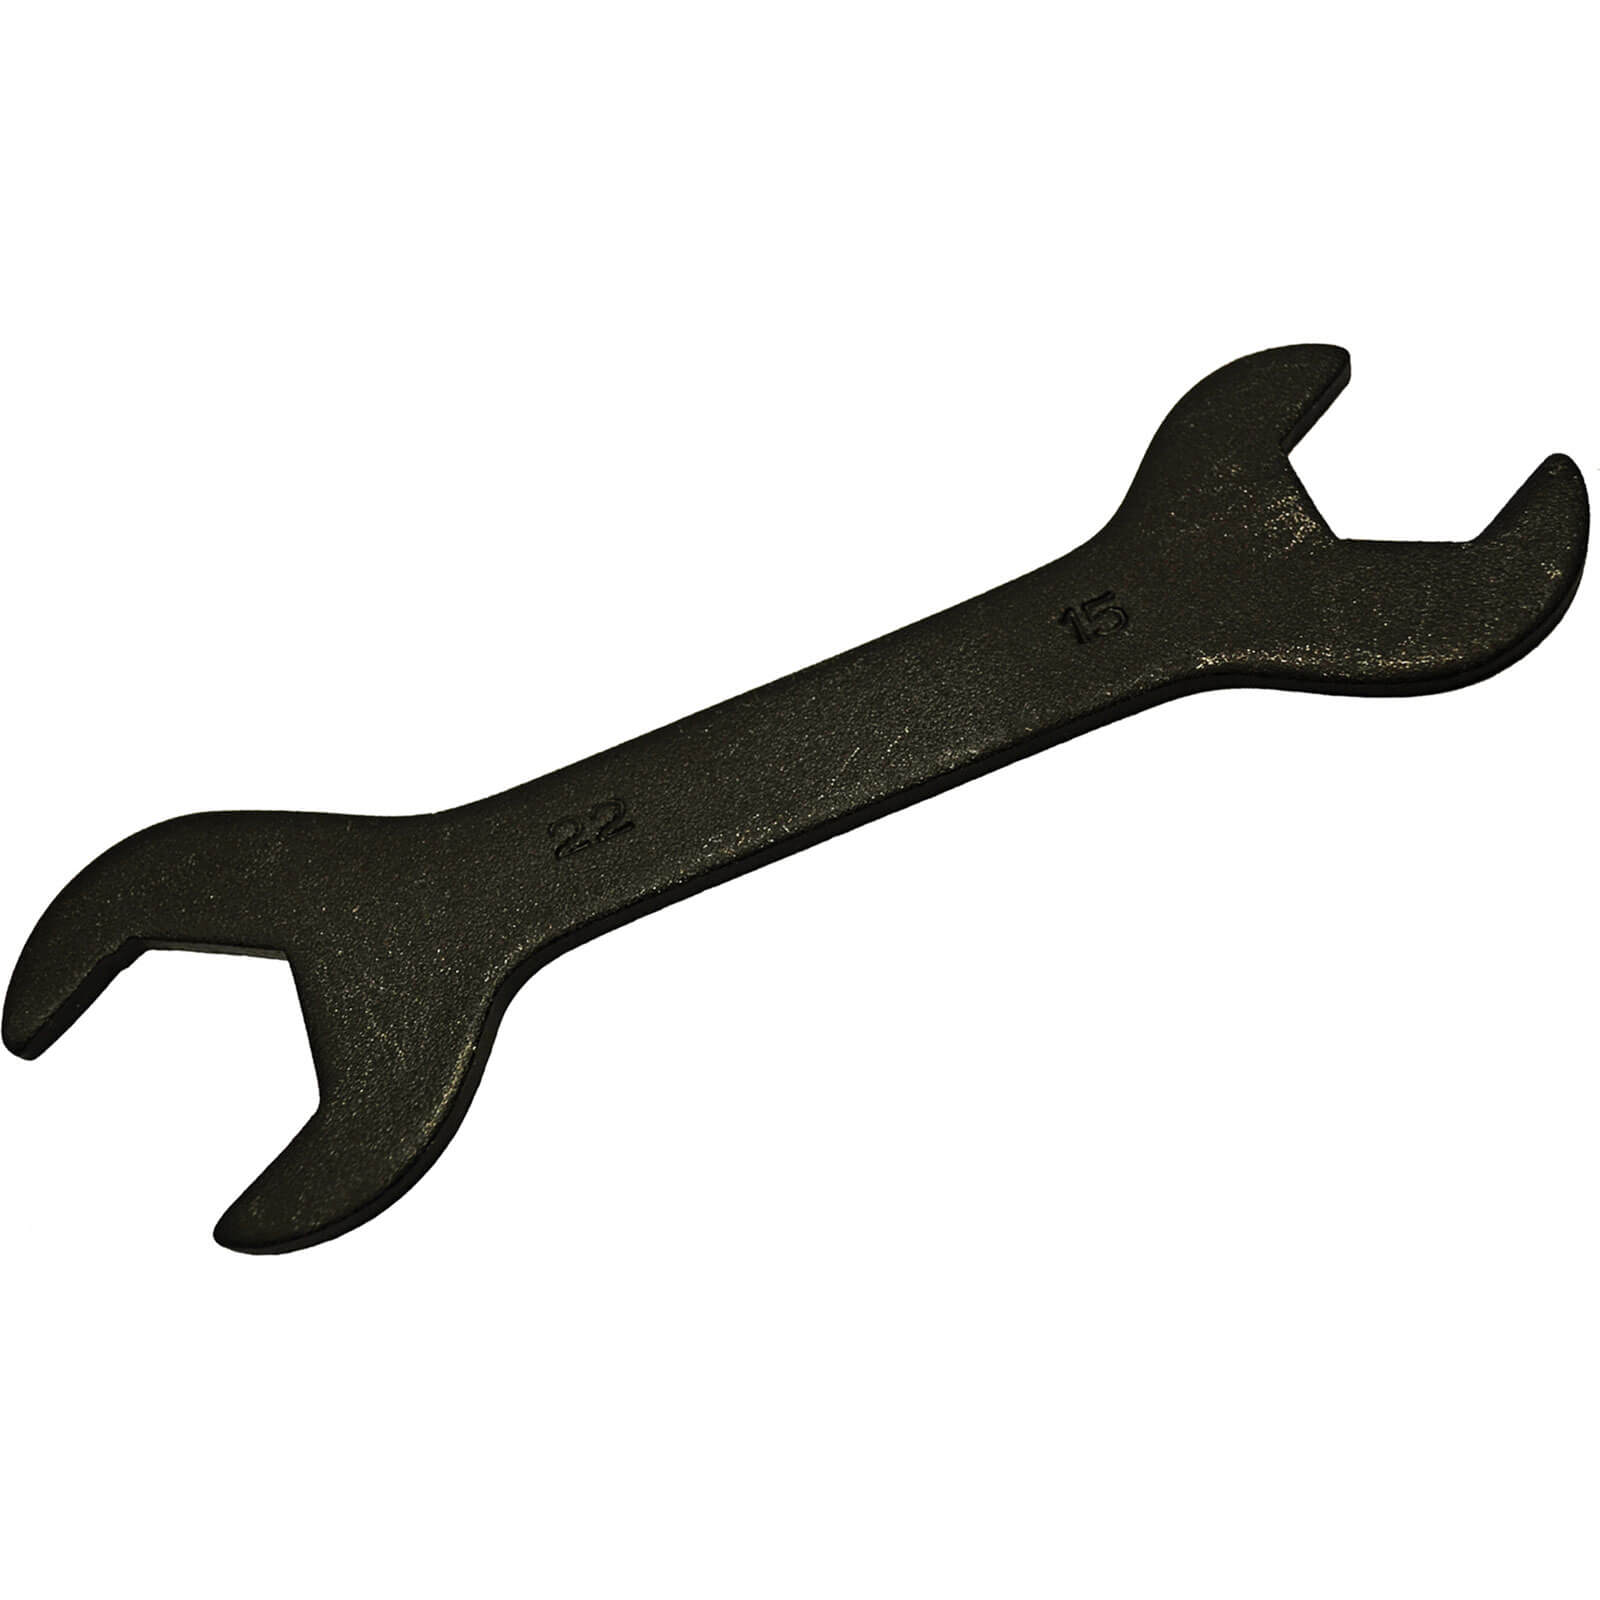 Image of Faithfull Compression Fitting Spanner Metric 15mm x 22mm